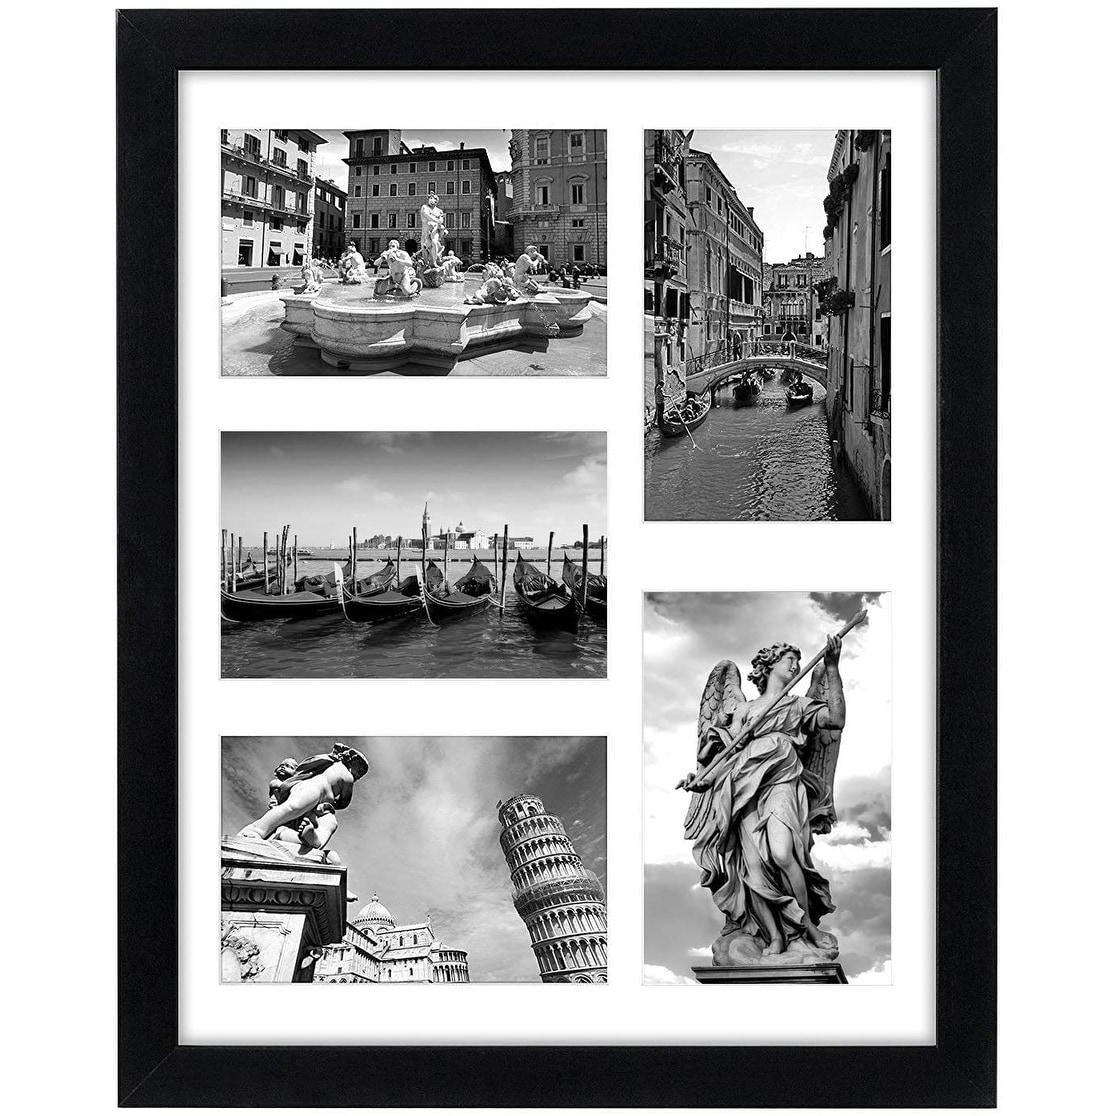 https://ak1.ostkcdn.com/images/products/is/images/direct/70f9816af3762b6f0c786f5ad5f0452ed3c4c80e/11x14-Collage-Picture-Frame-in-Black-with-Five-4x6-Picture.jpg